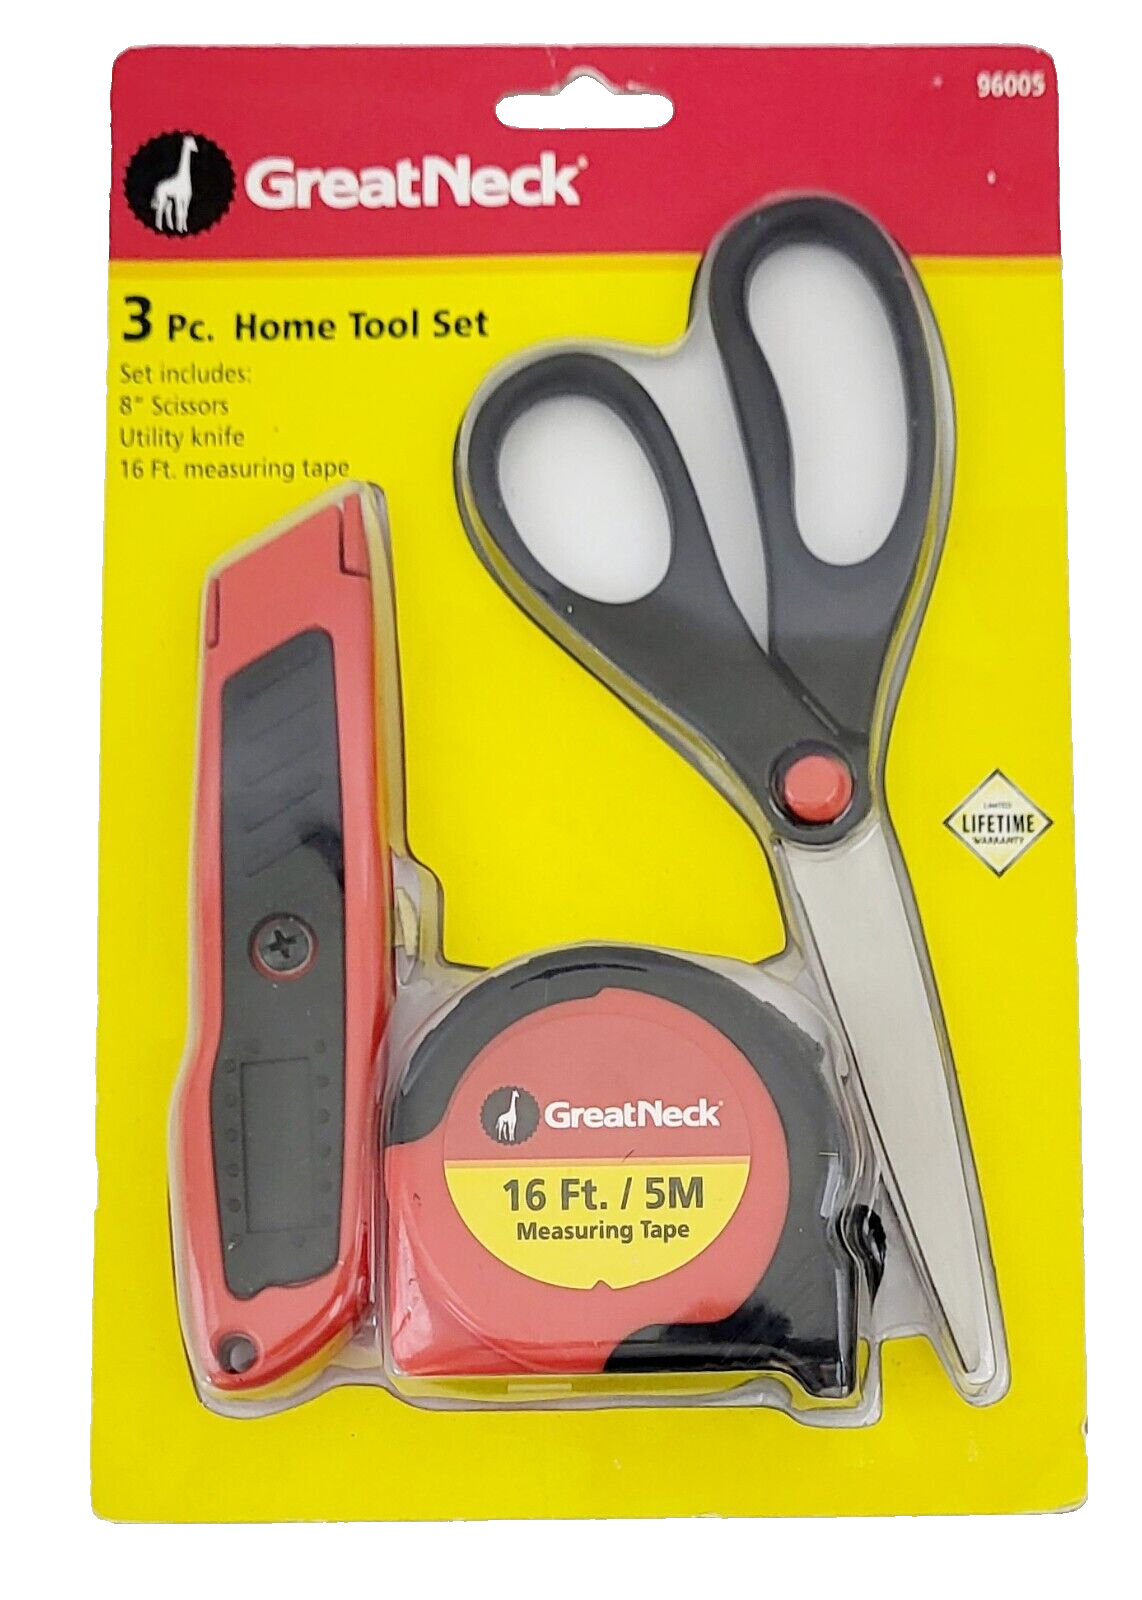 Great Neck Home Tools 3 Pc. Household Tool Set - $16.41